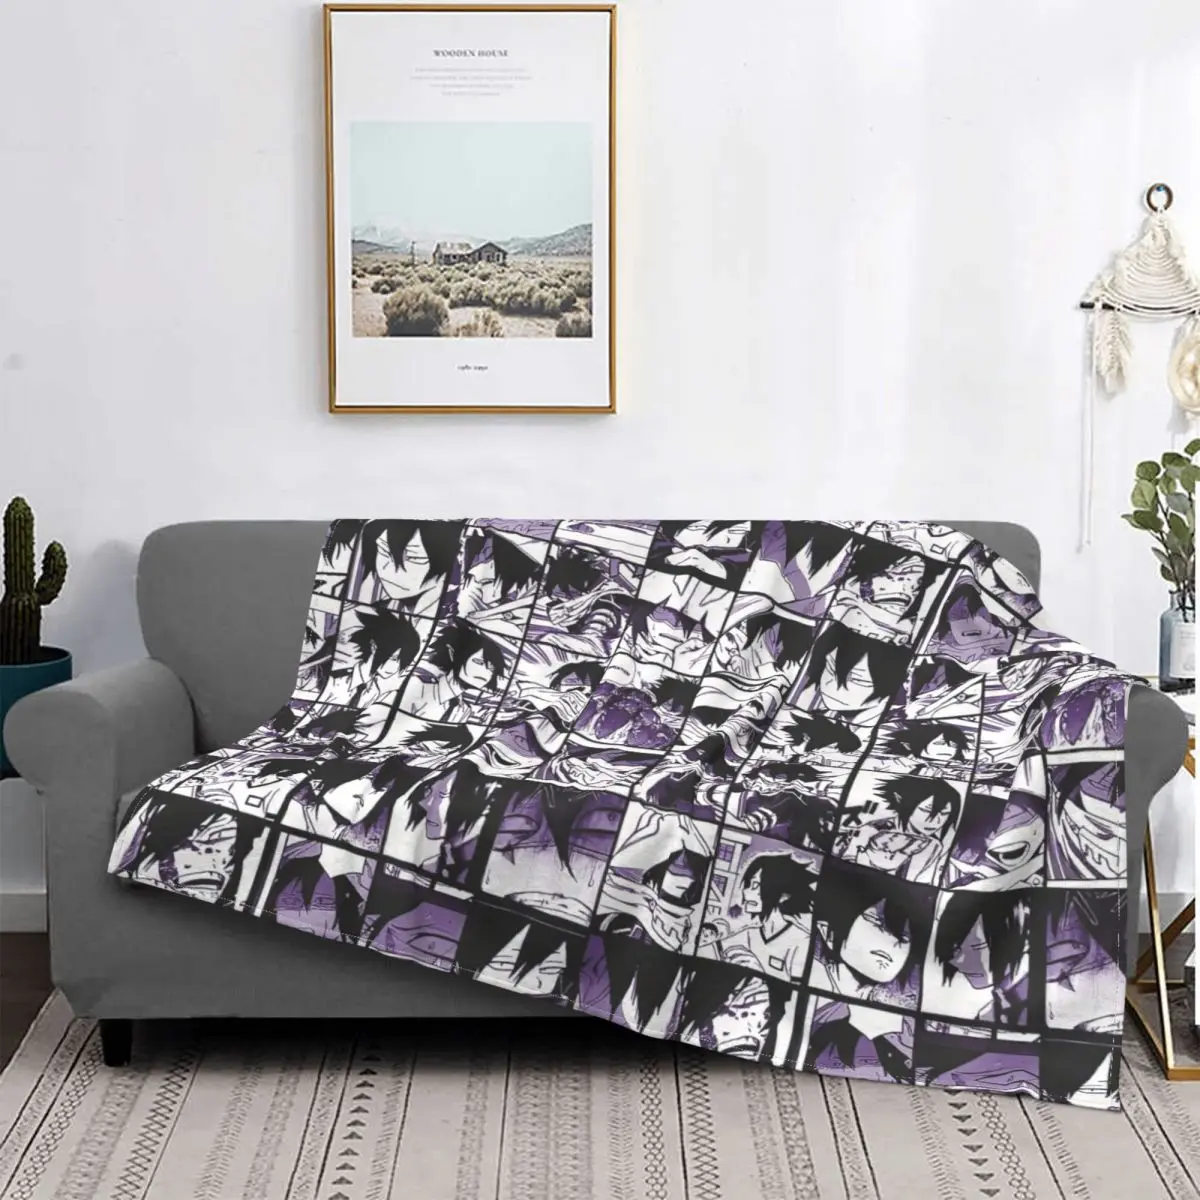 

My Hero Academia Dabi Collage Blankets Fleece Winter Anime Plaid Breathable Soft Throw Blanket for Sofa Couch Bedding Throws